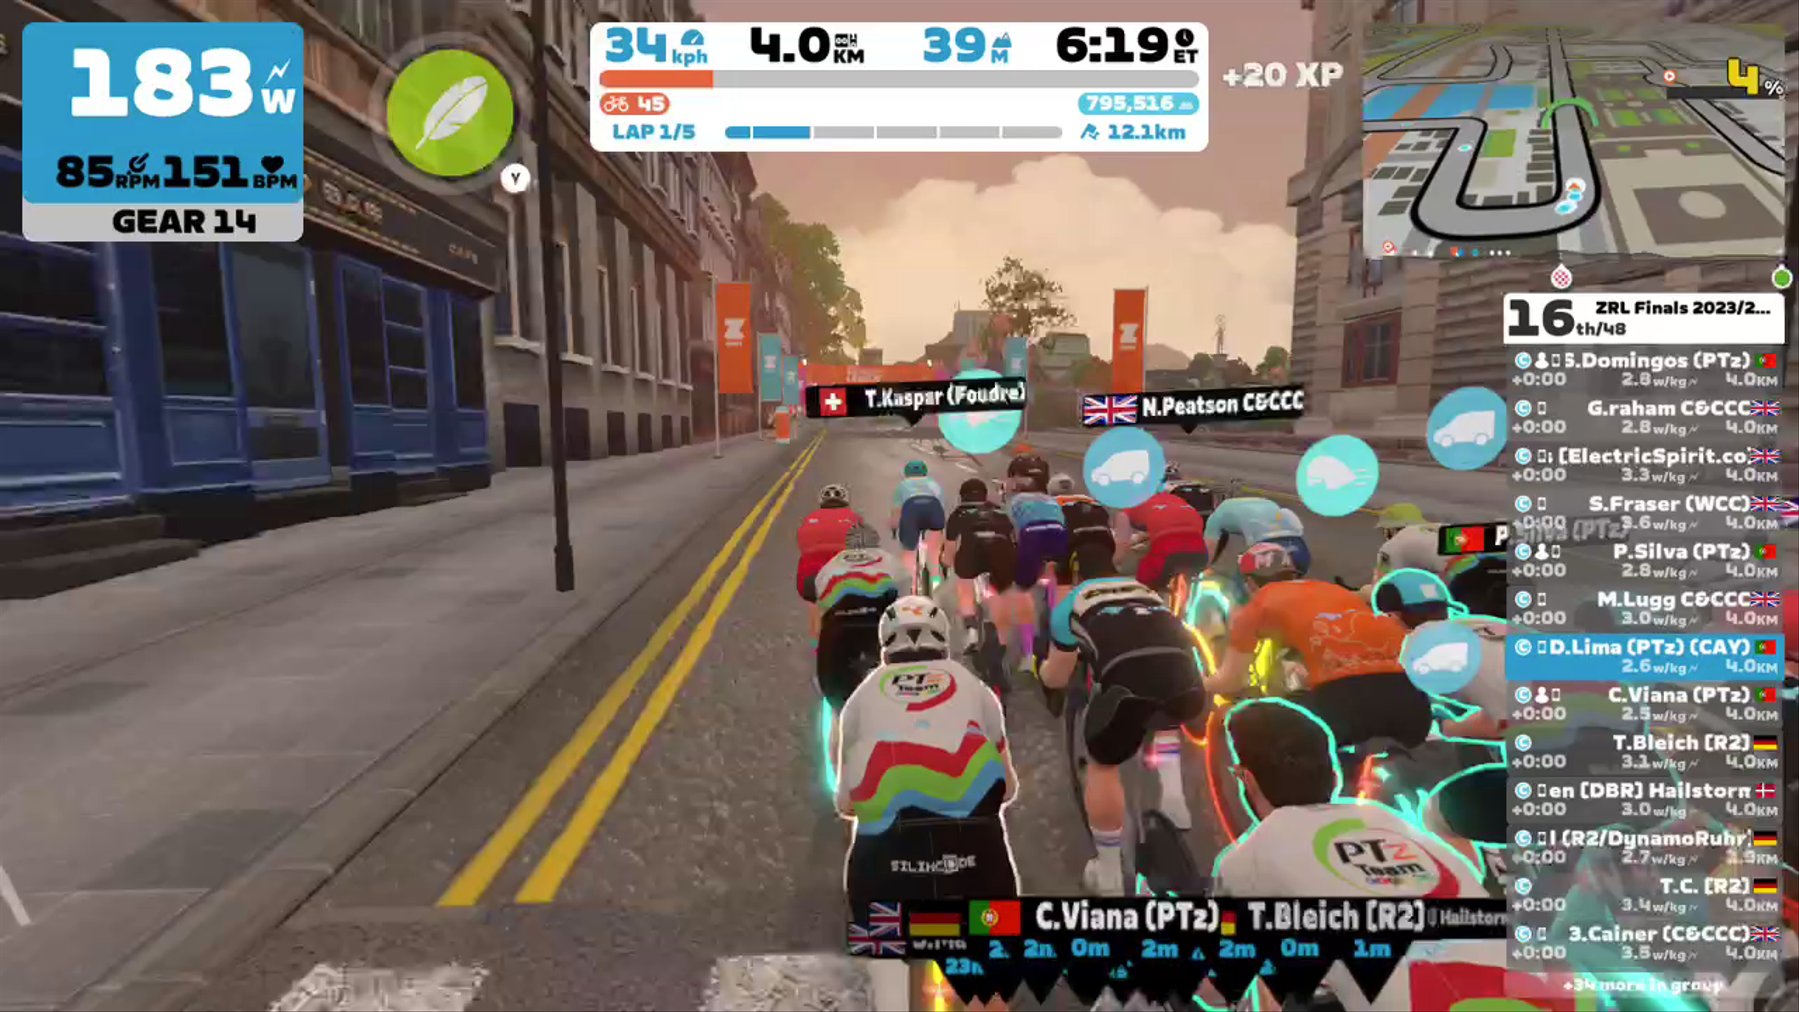 Zwift - Race: ZRL Finals 2023/24 - Open EMEAW Division 2 - Cup Final (Part2) (C) on Glasgow Reverse in Scotland